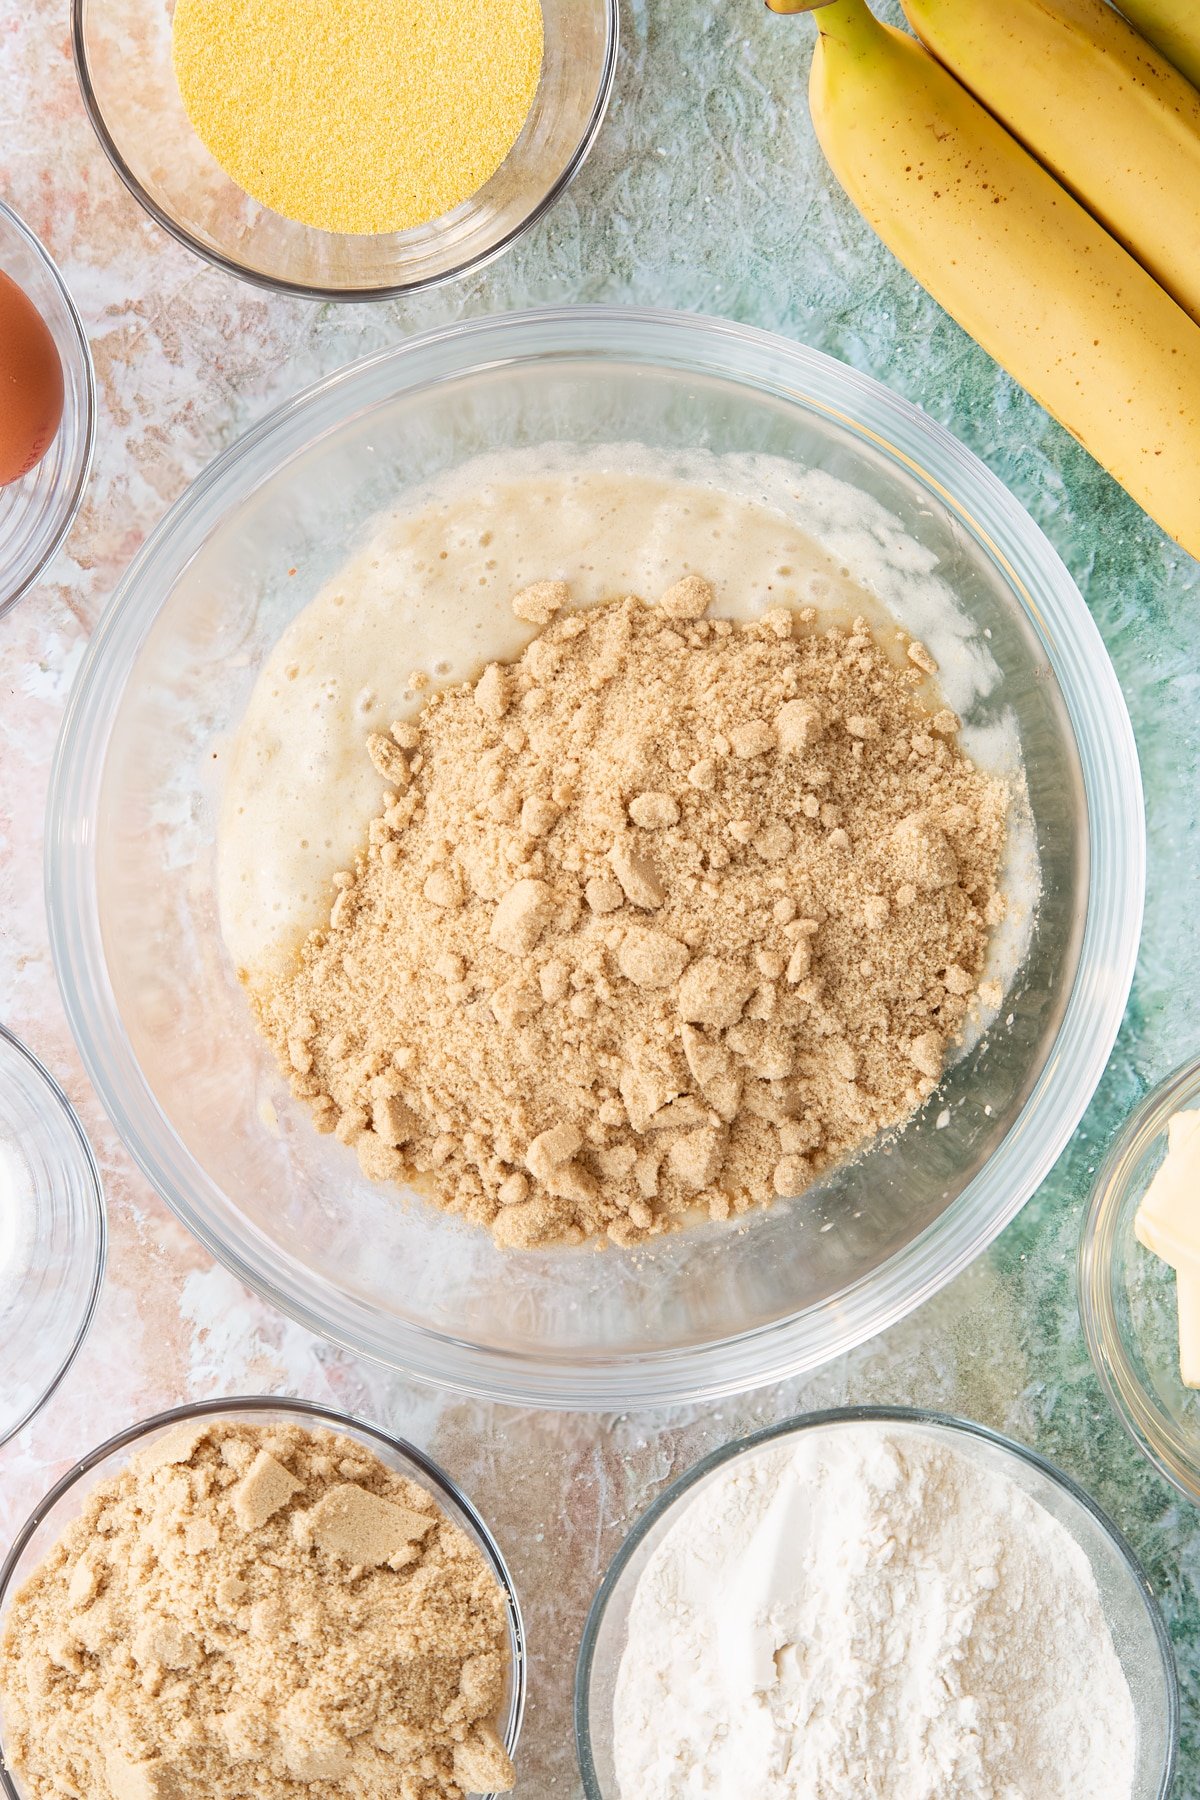 Mashed bananas in a bowl with sugar on top. Ingredients to make banana cornmeal muffin surround the bowl.